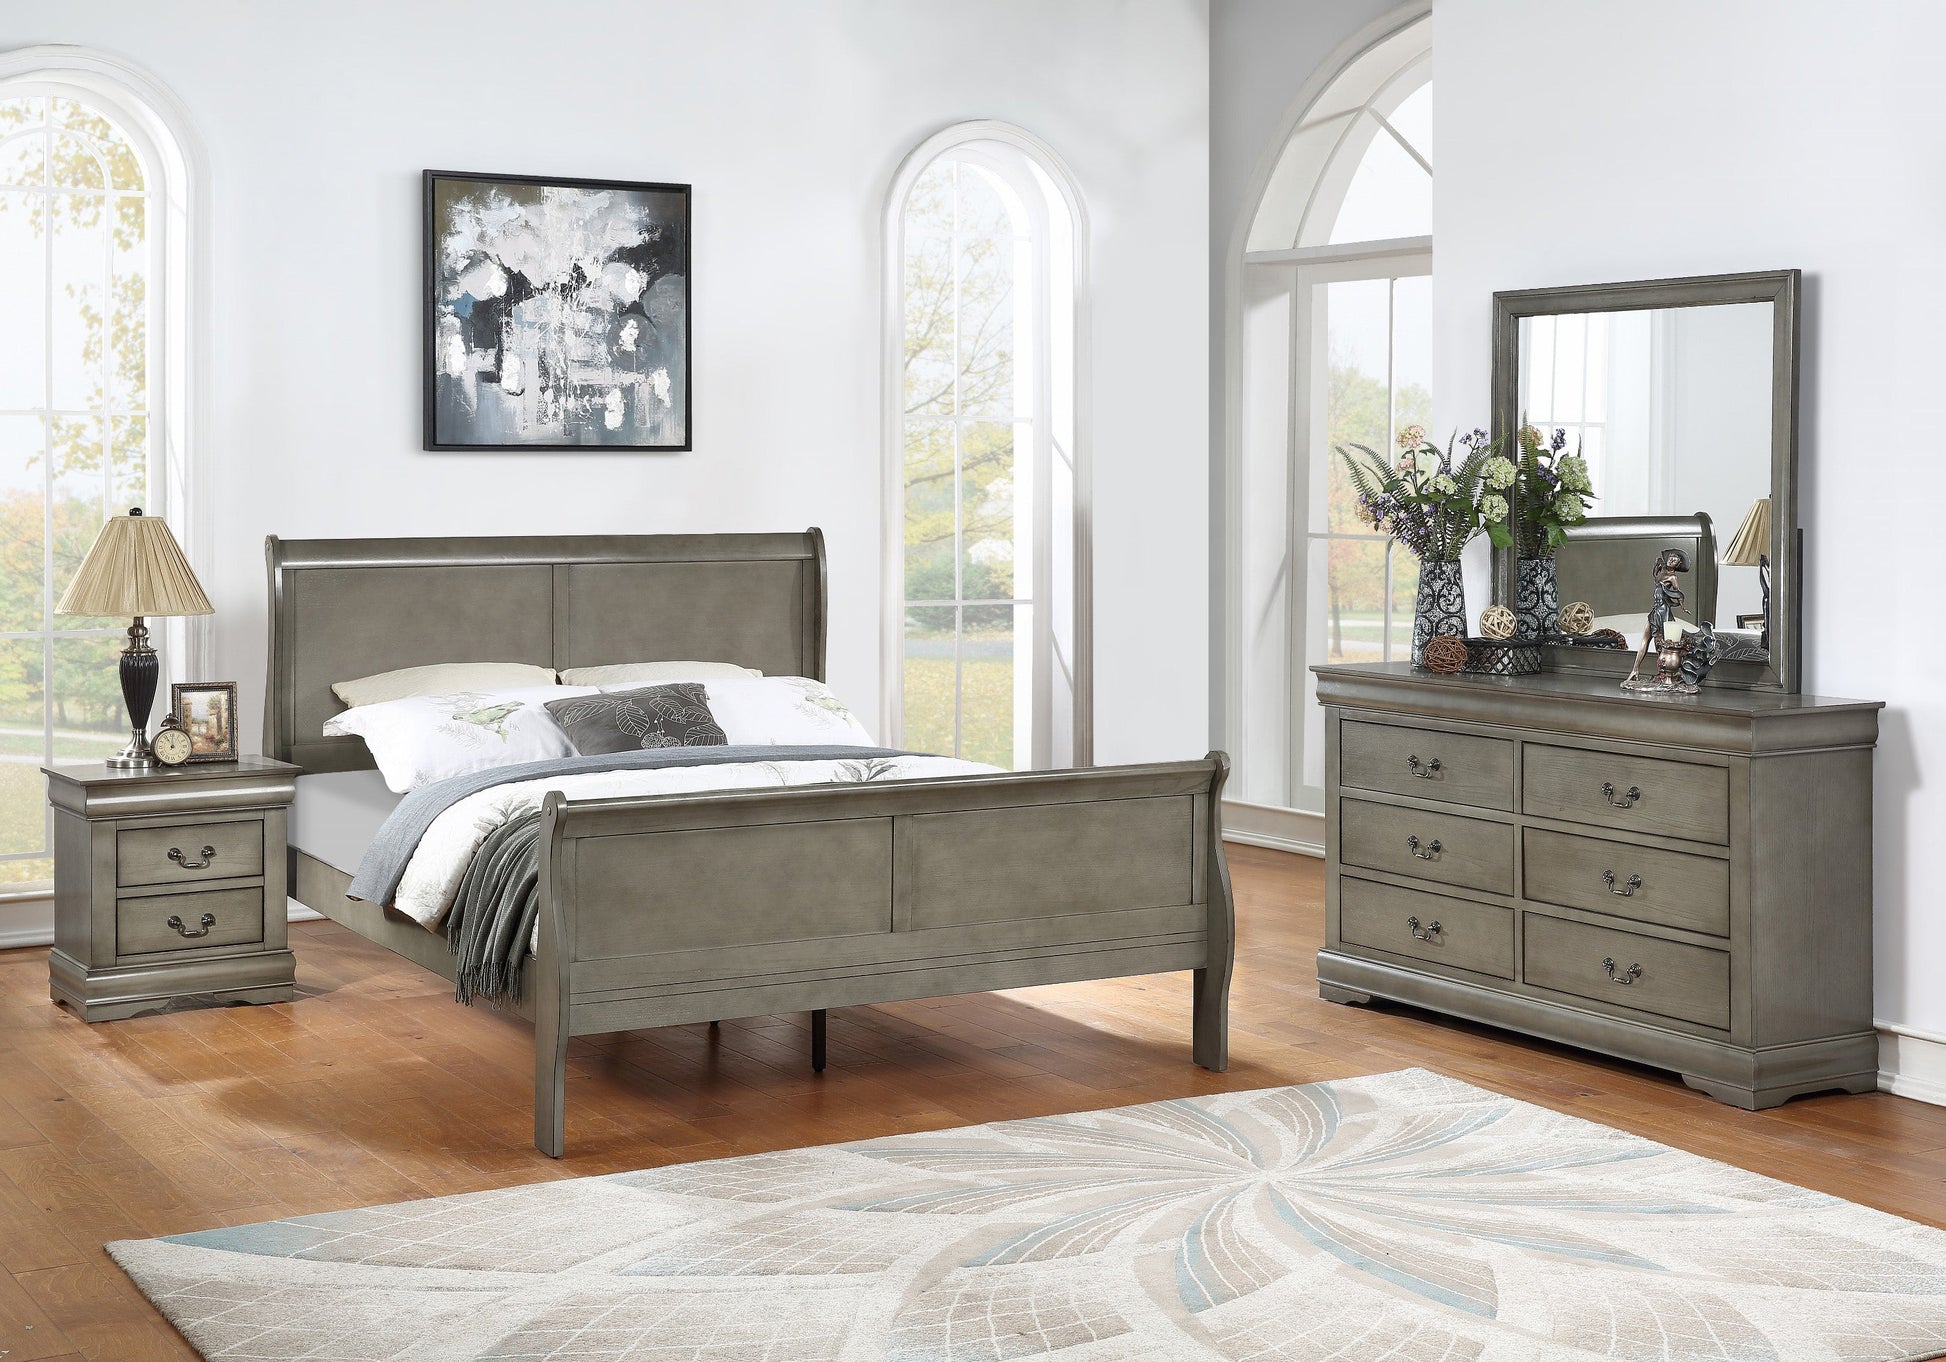 Louis Philip Gray Classic And Modern, Wood Mahogany Sleigh Bedroom Set